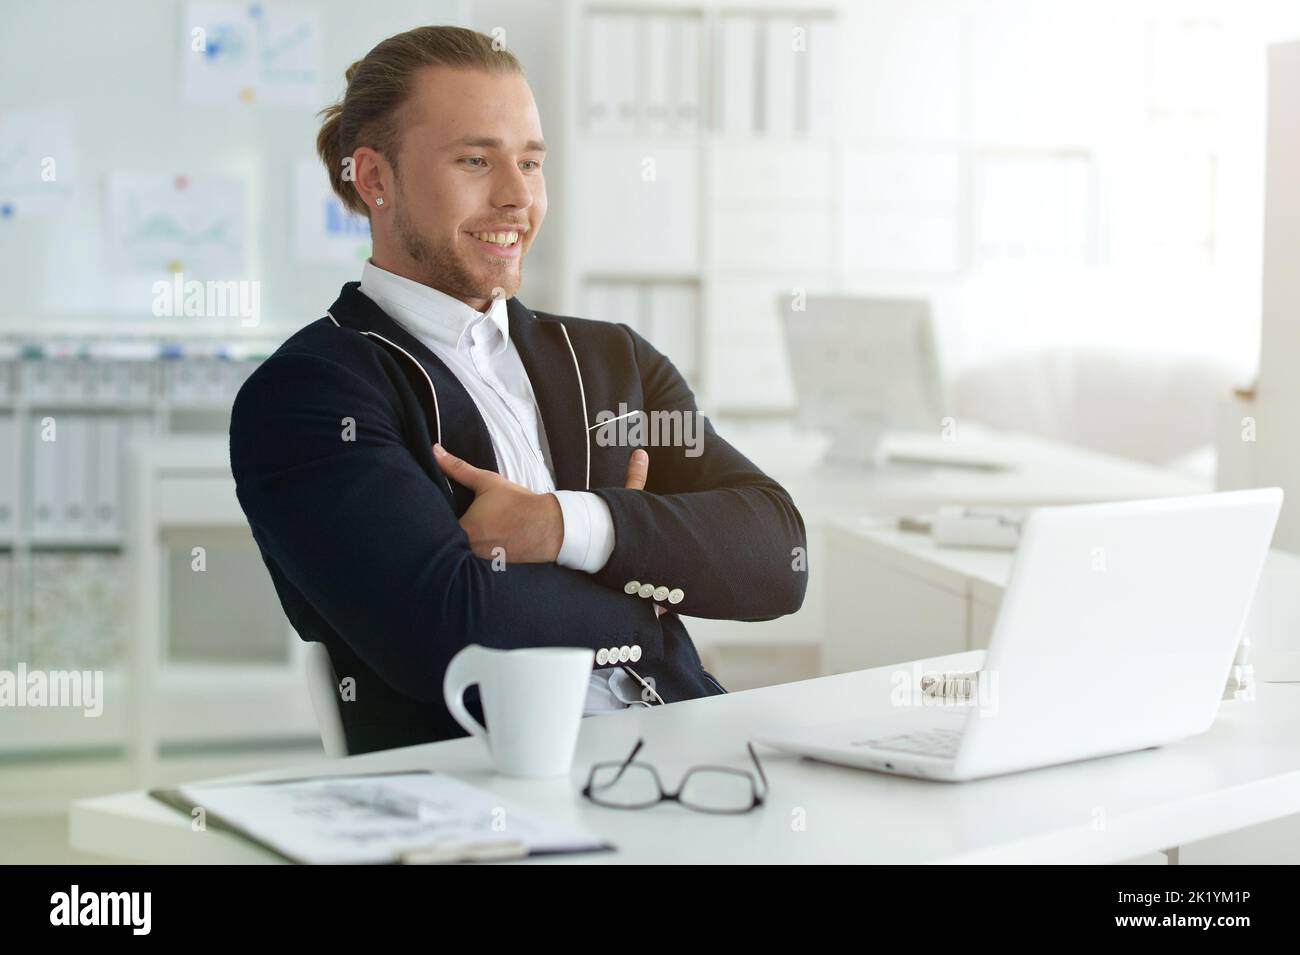 Portrait of a smiling beautiful businessman using a laptop. Stock Photo